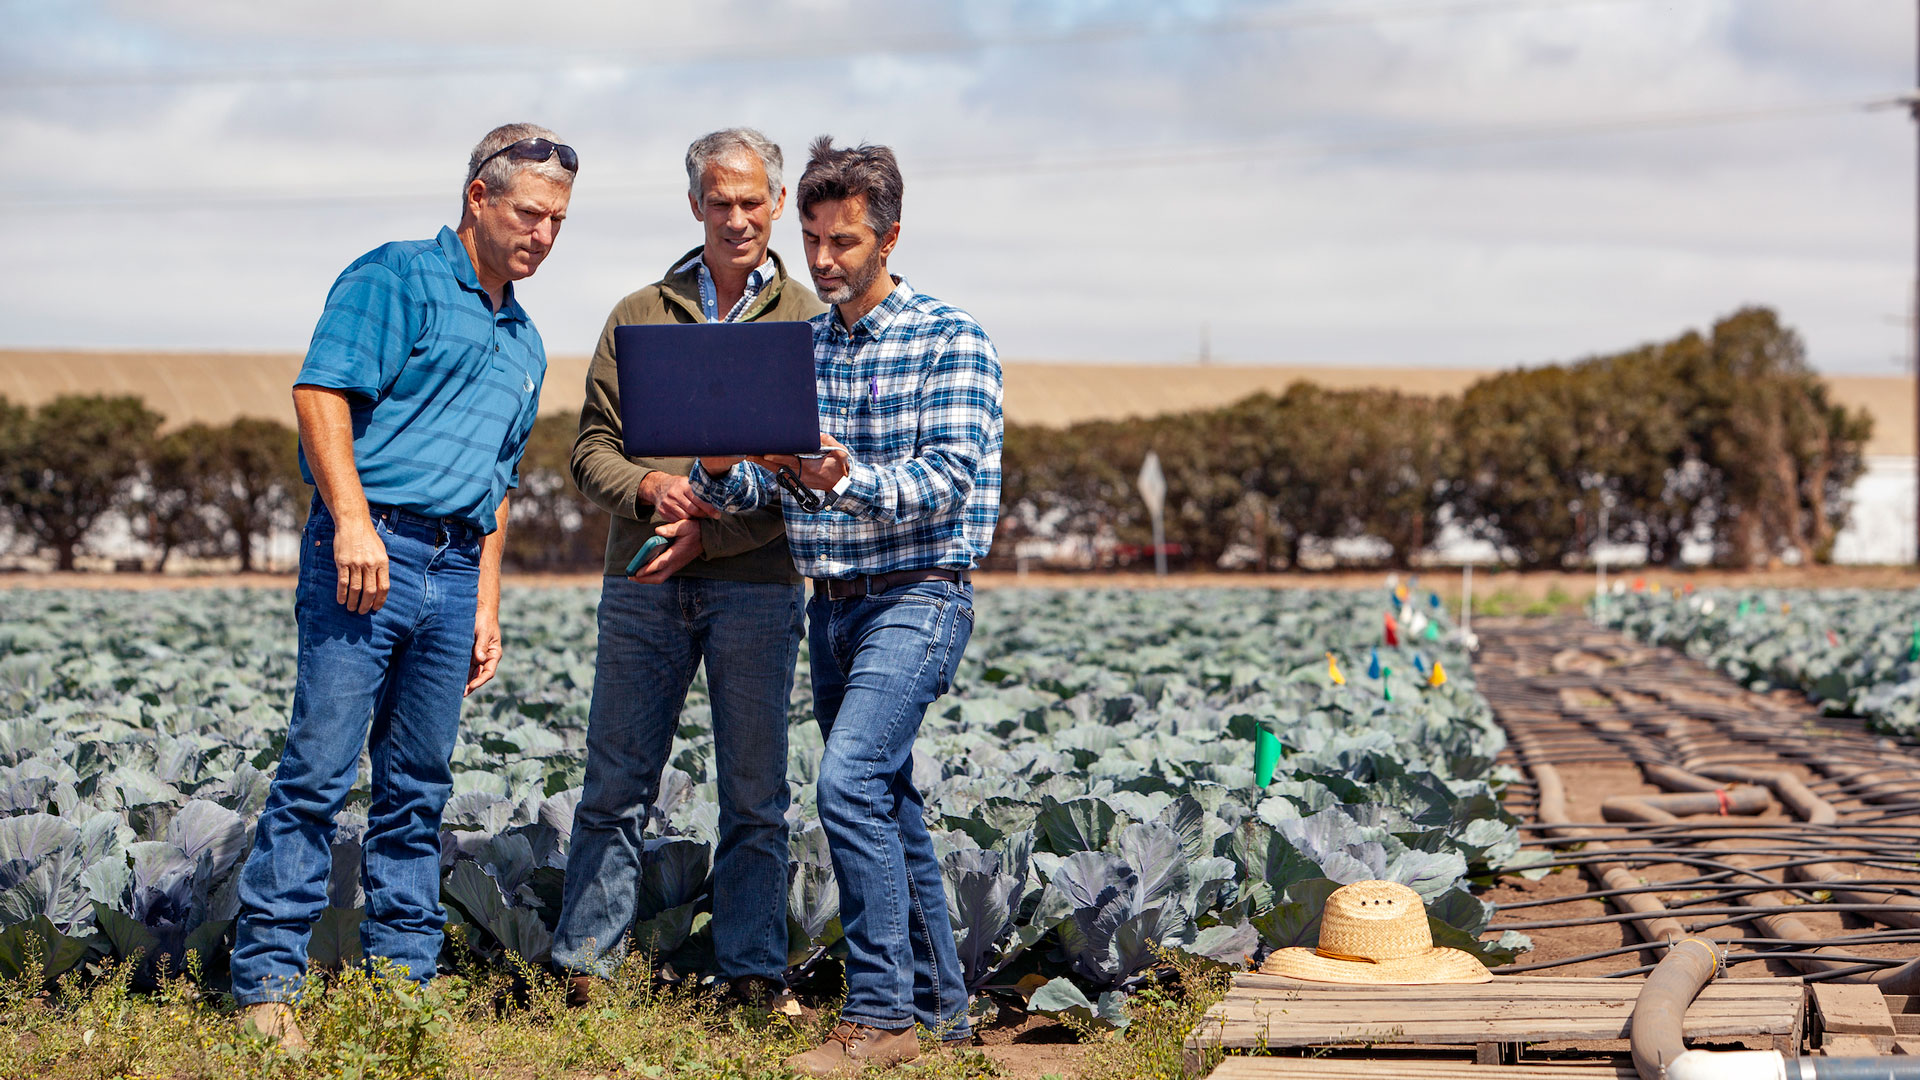 Forrest Melton (far right) checks data on a laptop while standing in a Salinas field with Mark Mason and Michael Cahn.